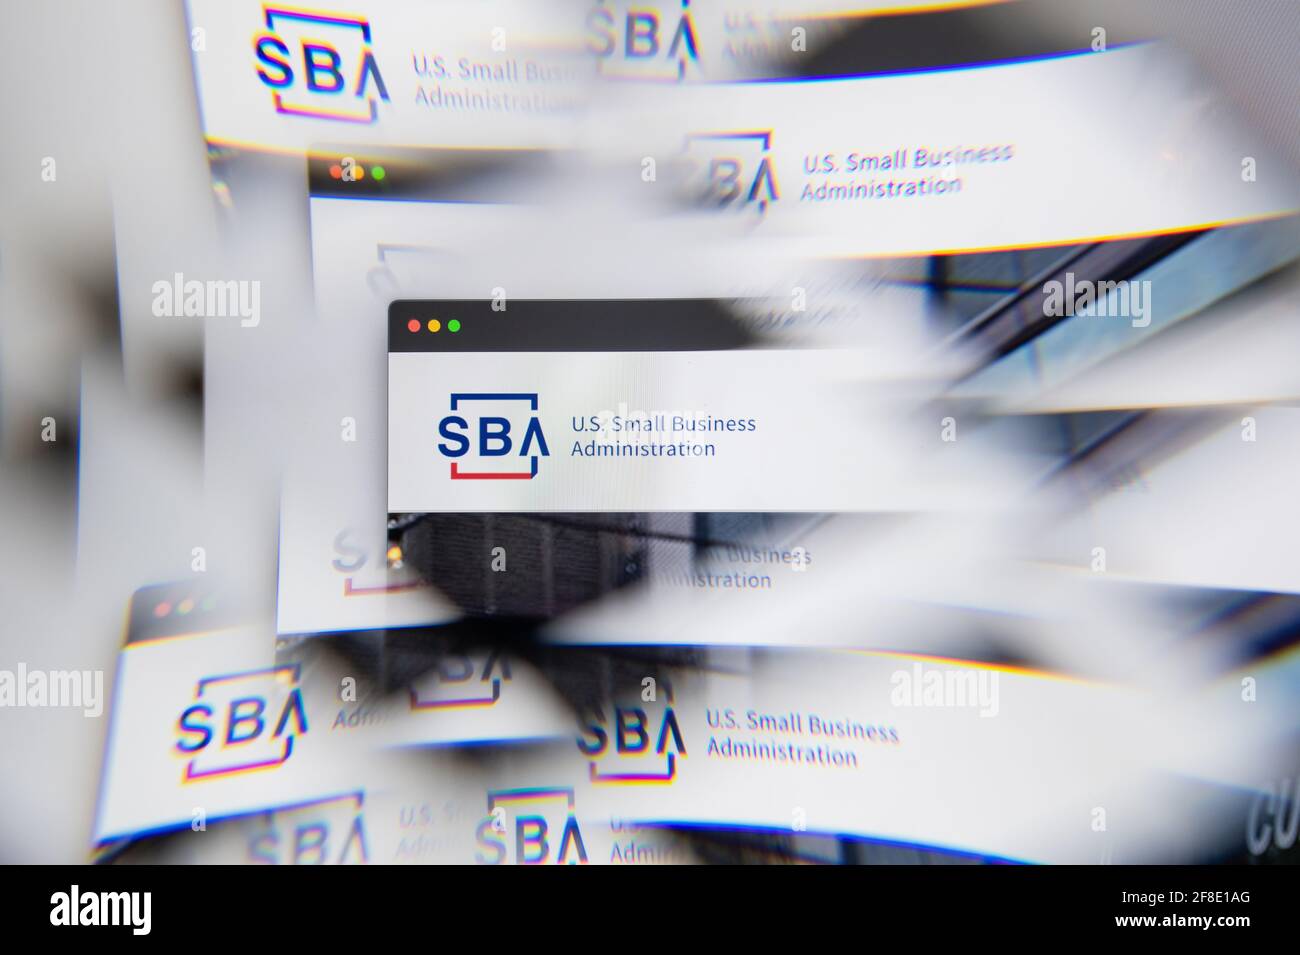 Milan, Italy - APRIL 10, 2021: US Small Business Administration SBA logo on laptop screen seen through an optical prism. Illustrative editorial image Stock Photo